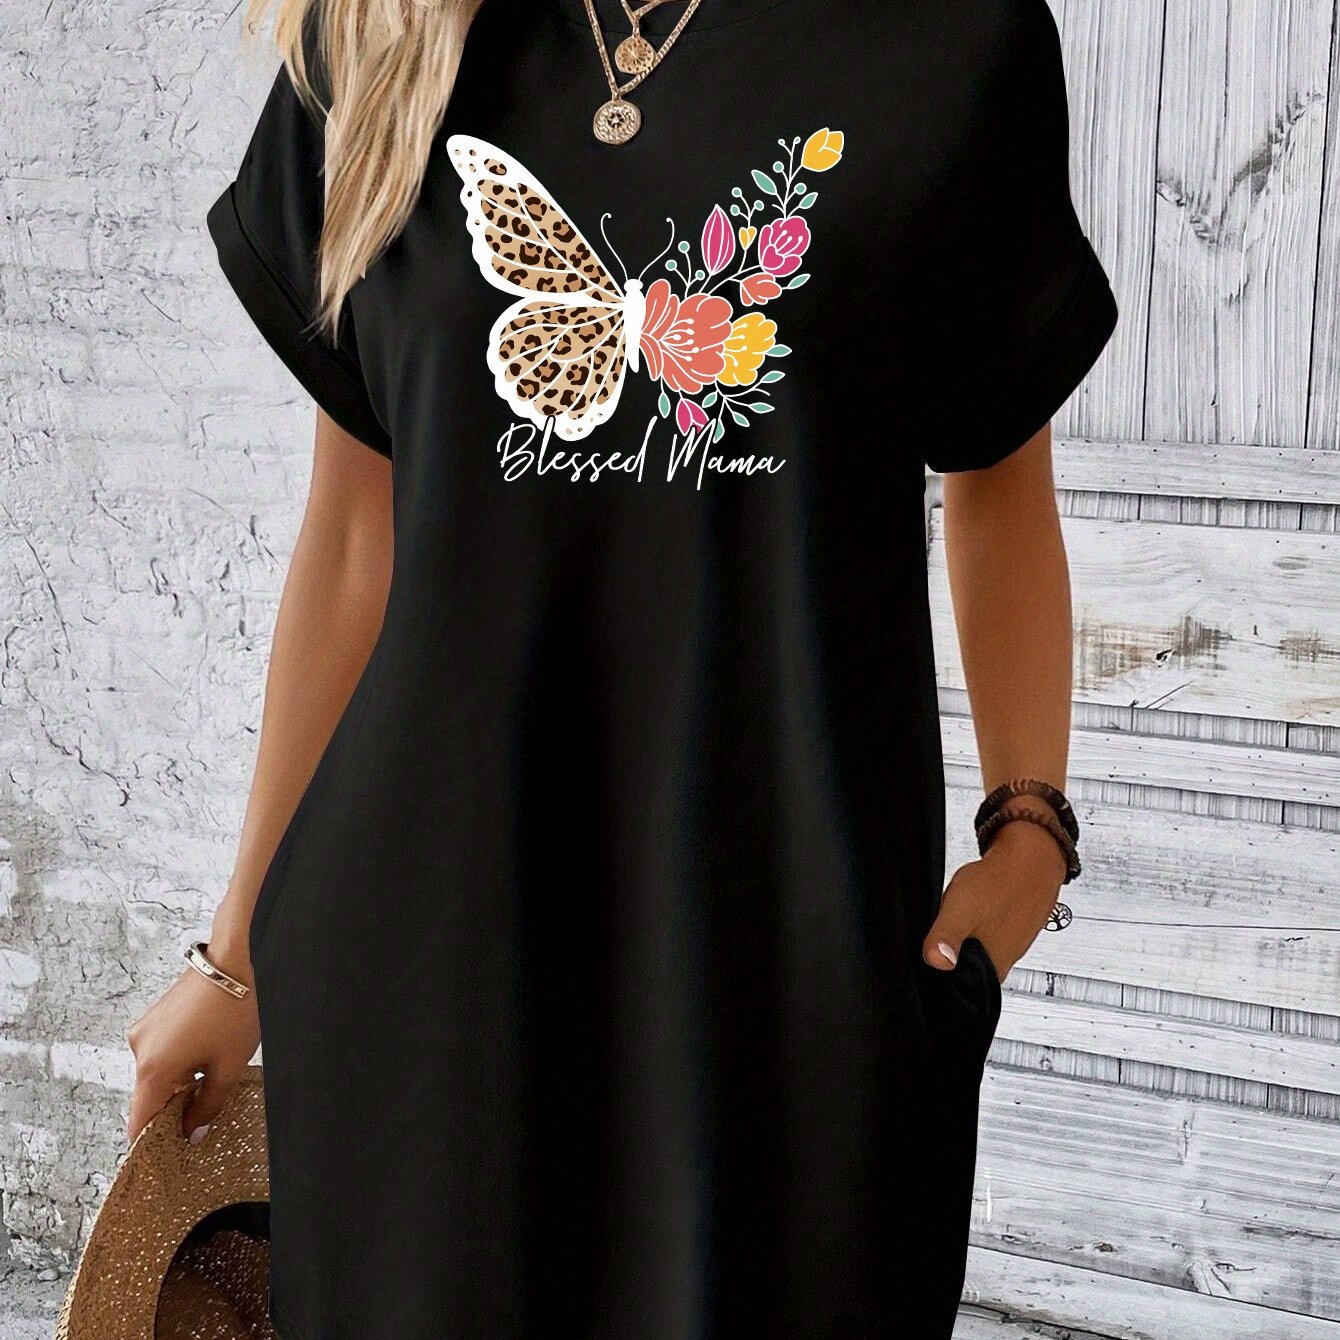 Blessed Mama Women's Christian T-shirt Casual Dress claimedbygoddesigns